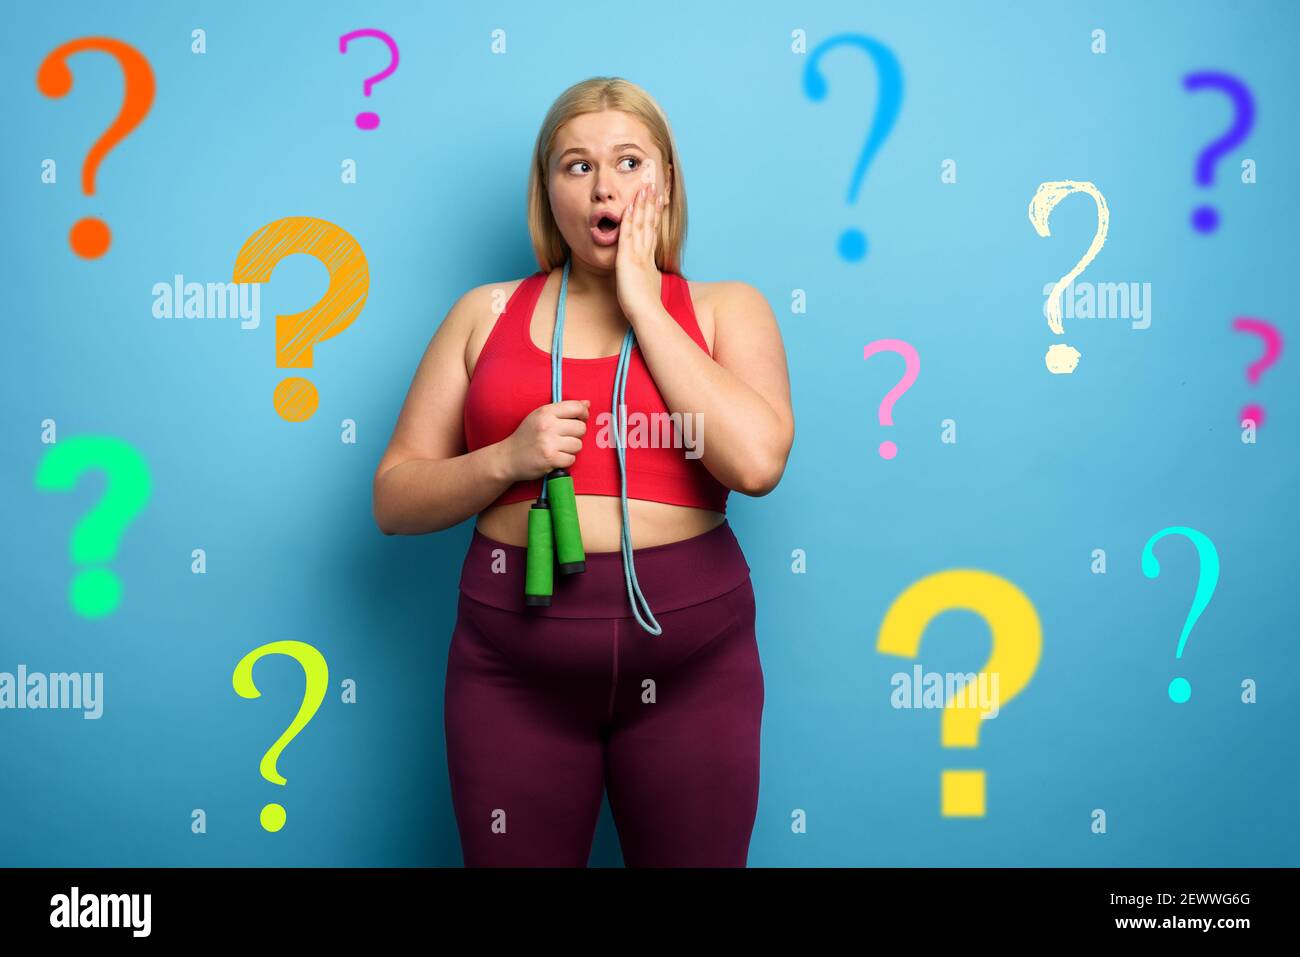 Fat girl does gym but is worried due to lot of questions. cyan background Stock Photo